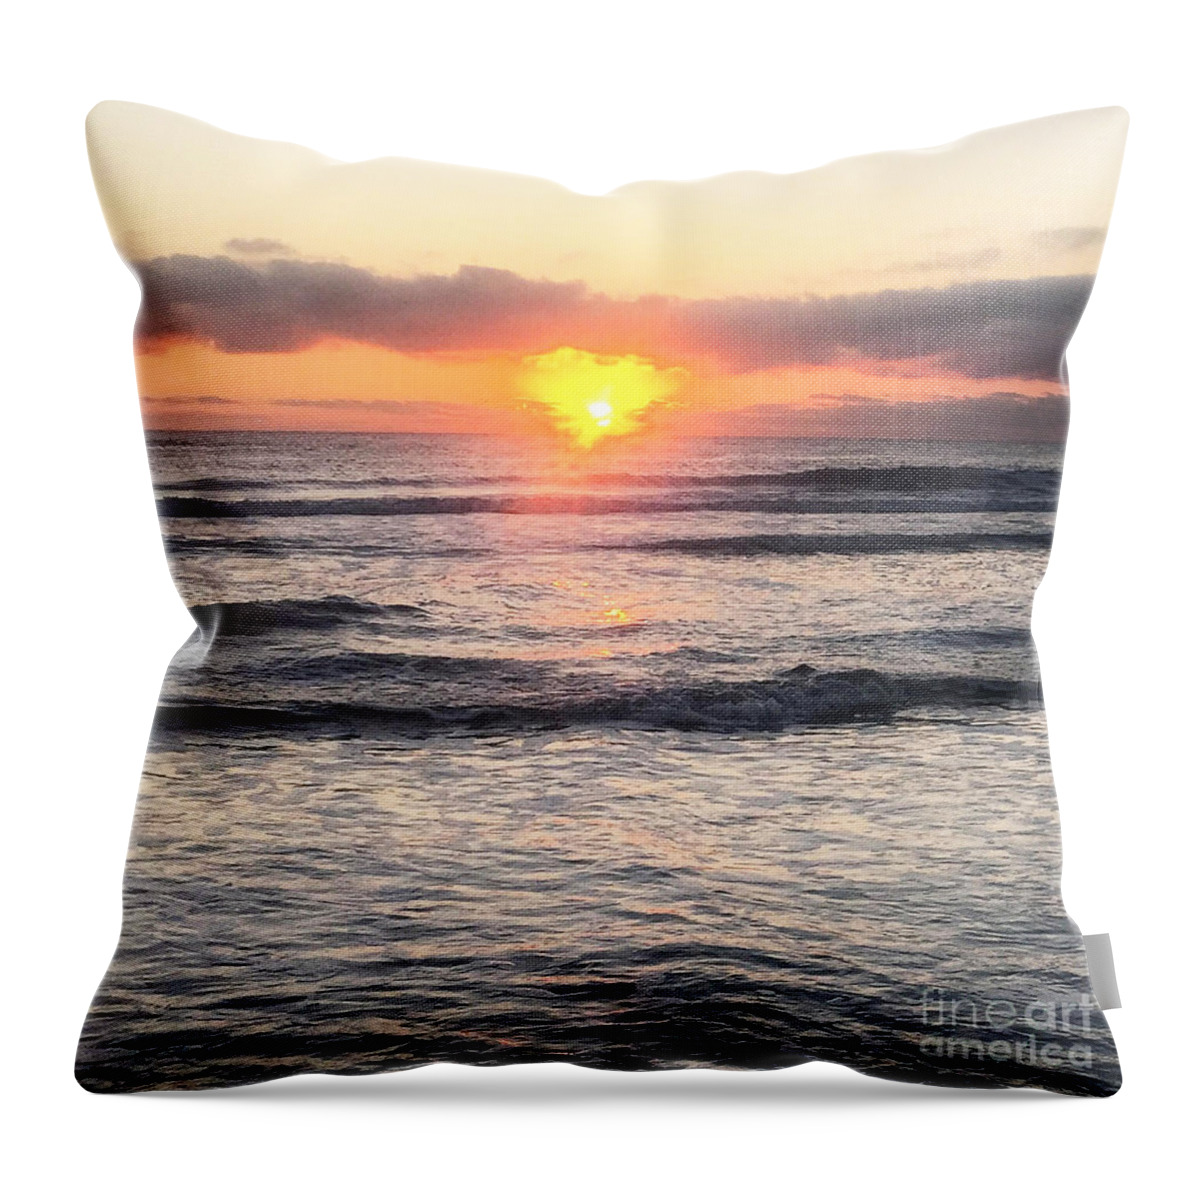 Heart Throw Pillow featuring the photograph Radiance by LeeAnn Kendall